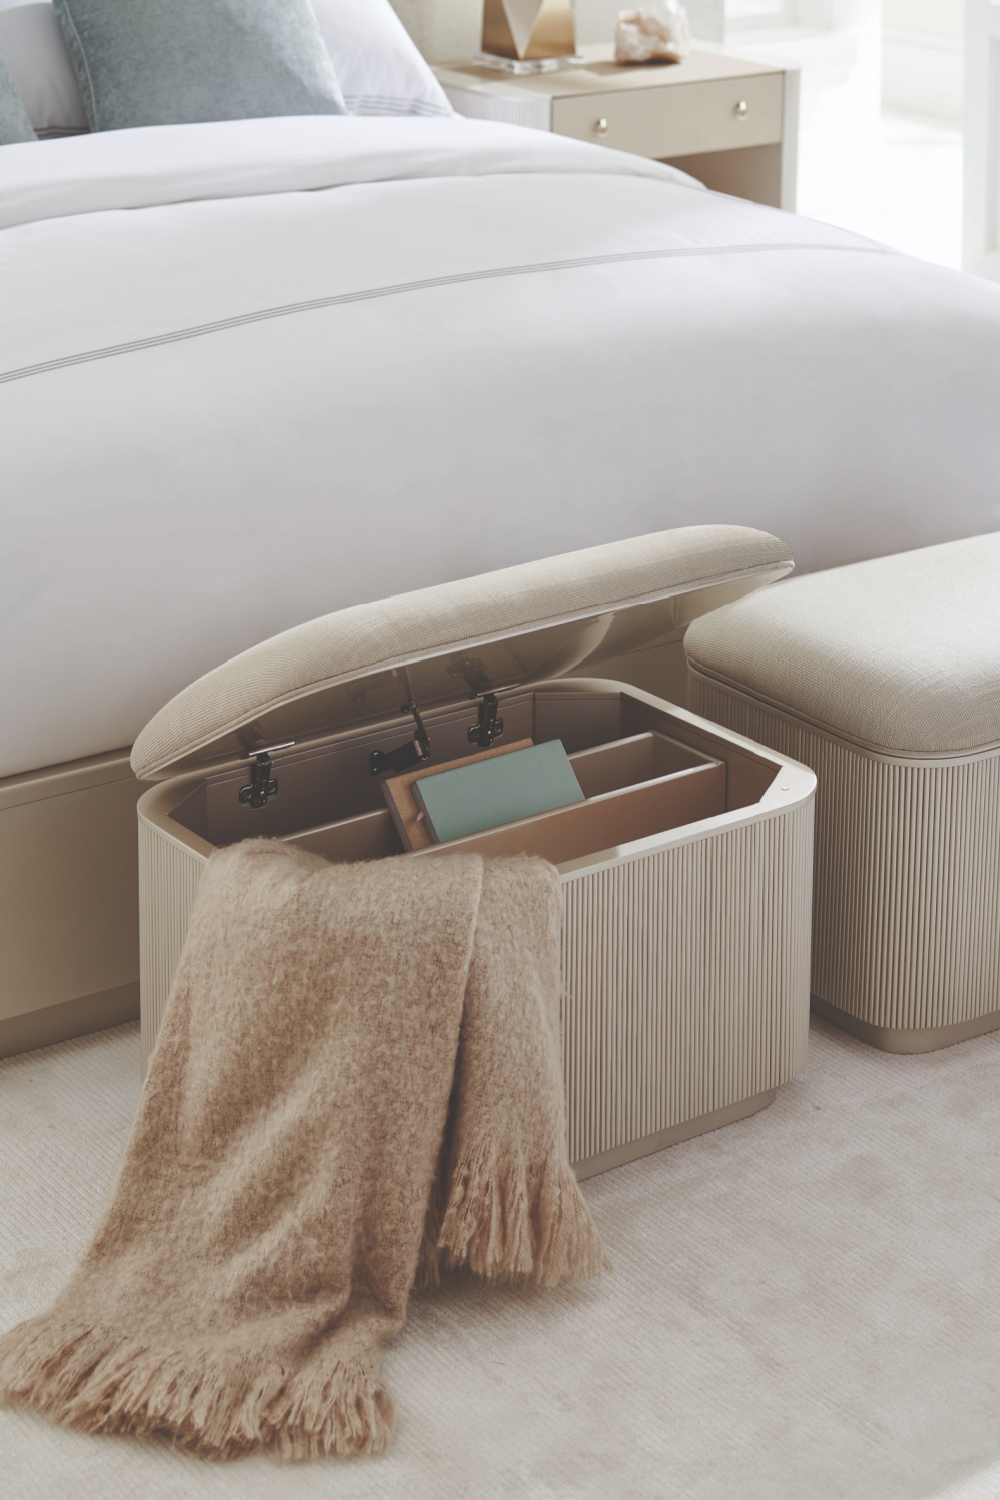 Beige Fluted Storage Ottoman | Caracole For The Love Of | Oroa.com